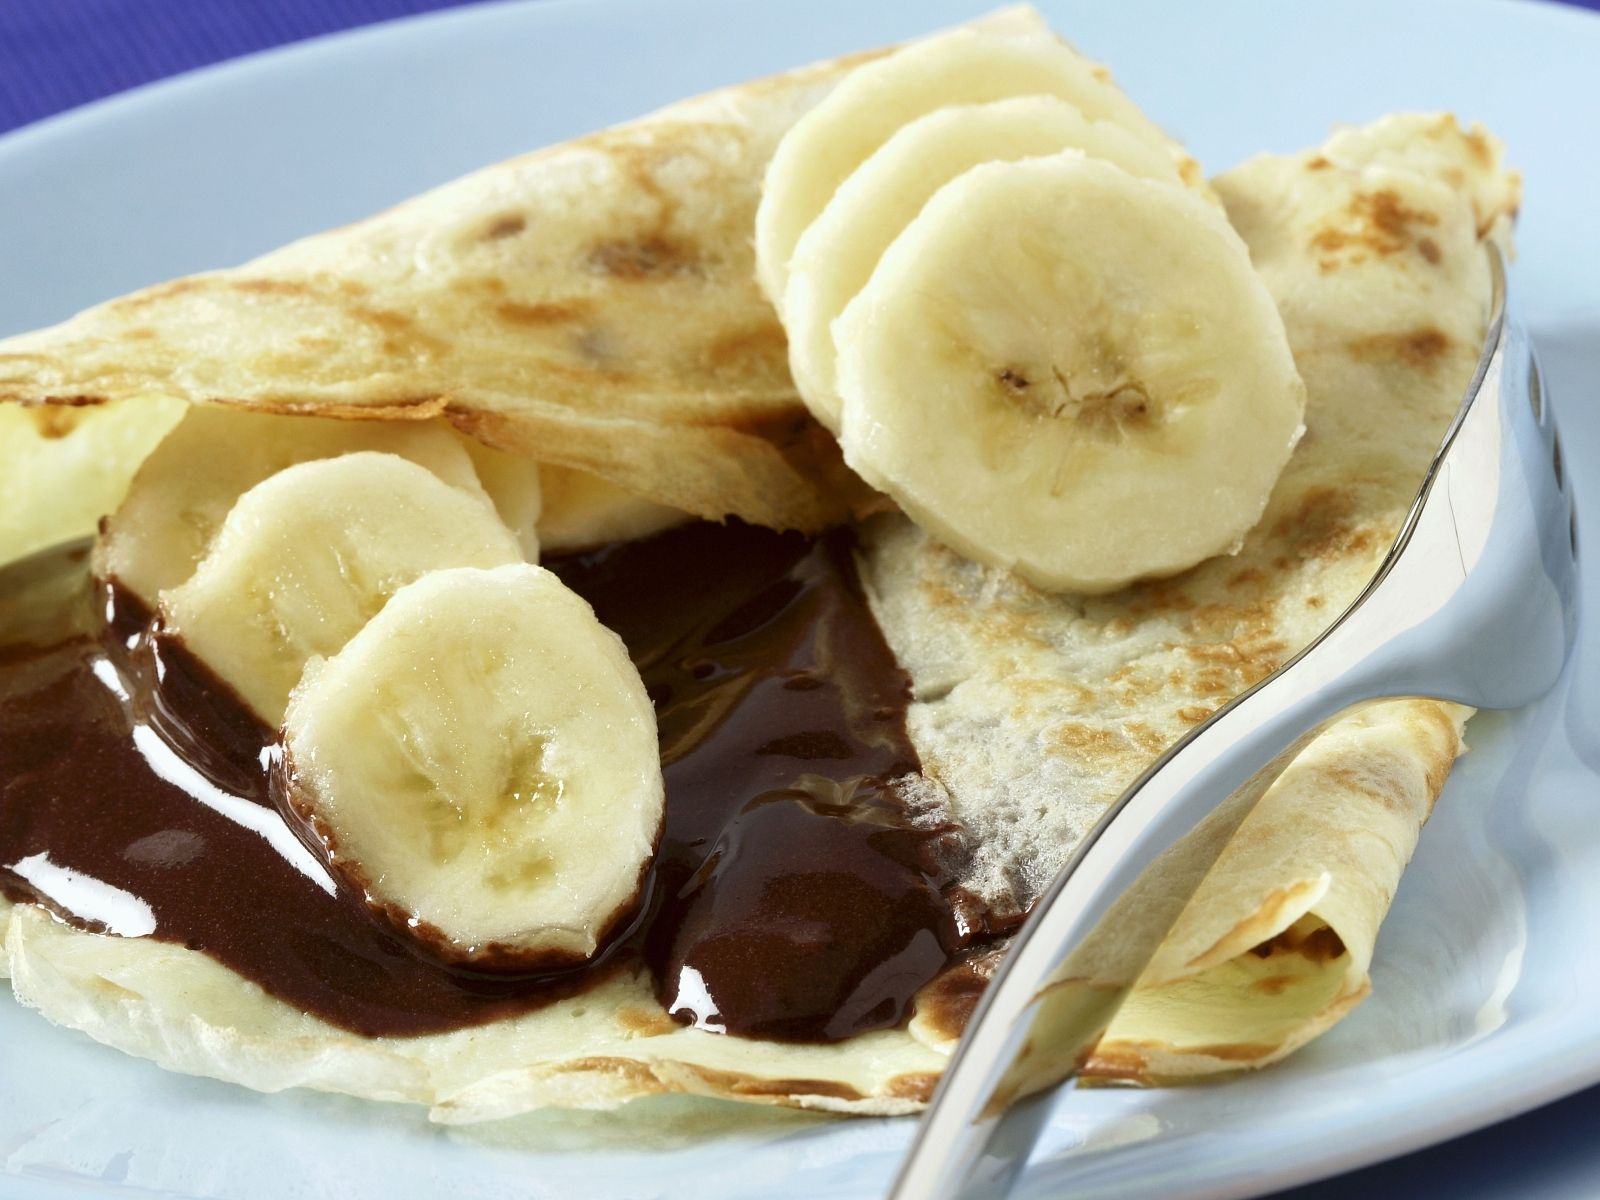 Pear and Chocolate Crepes recipe